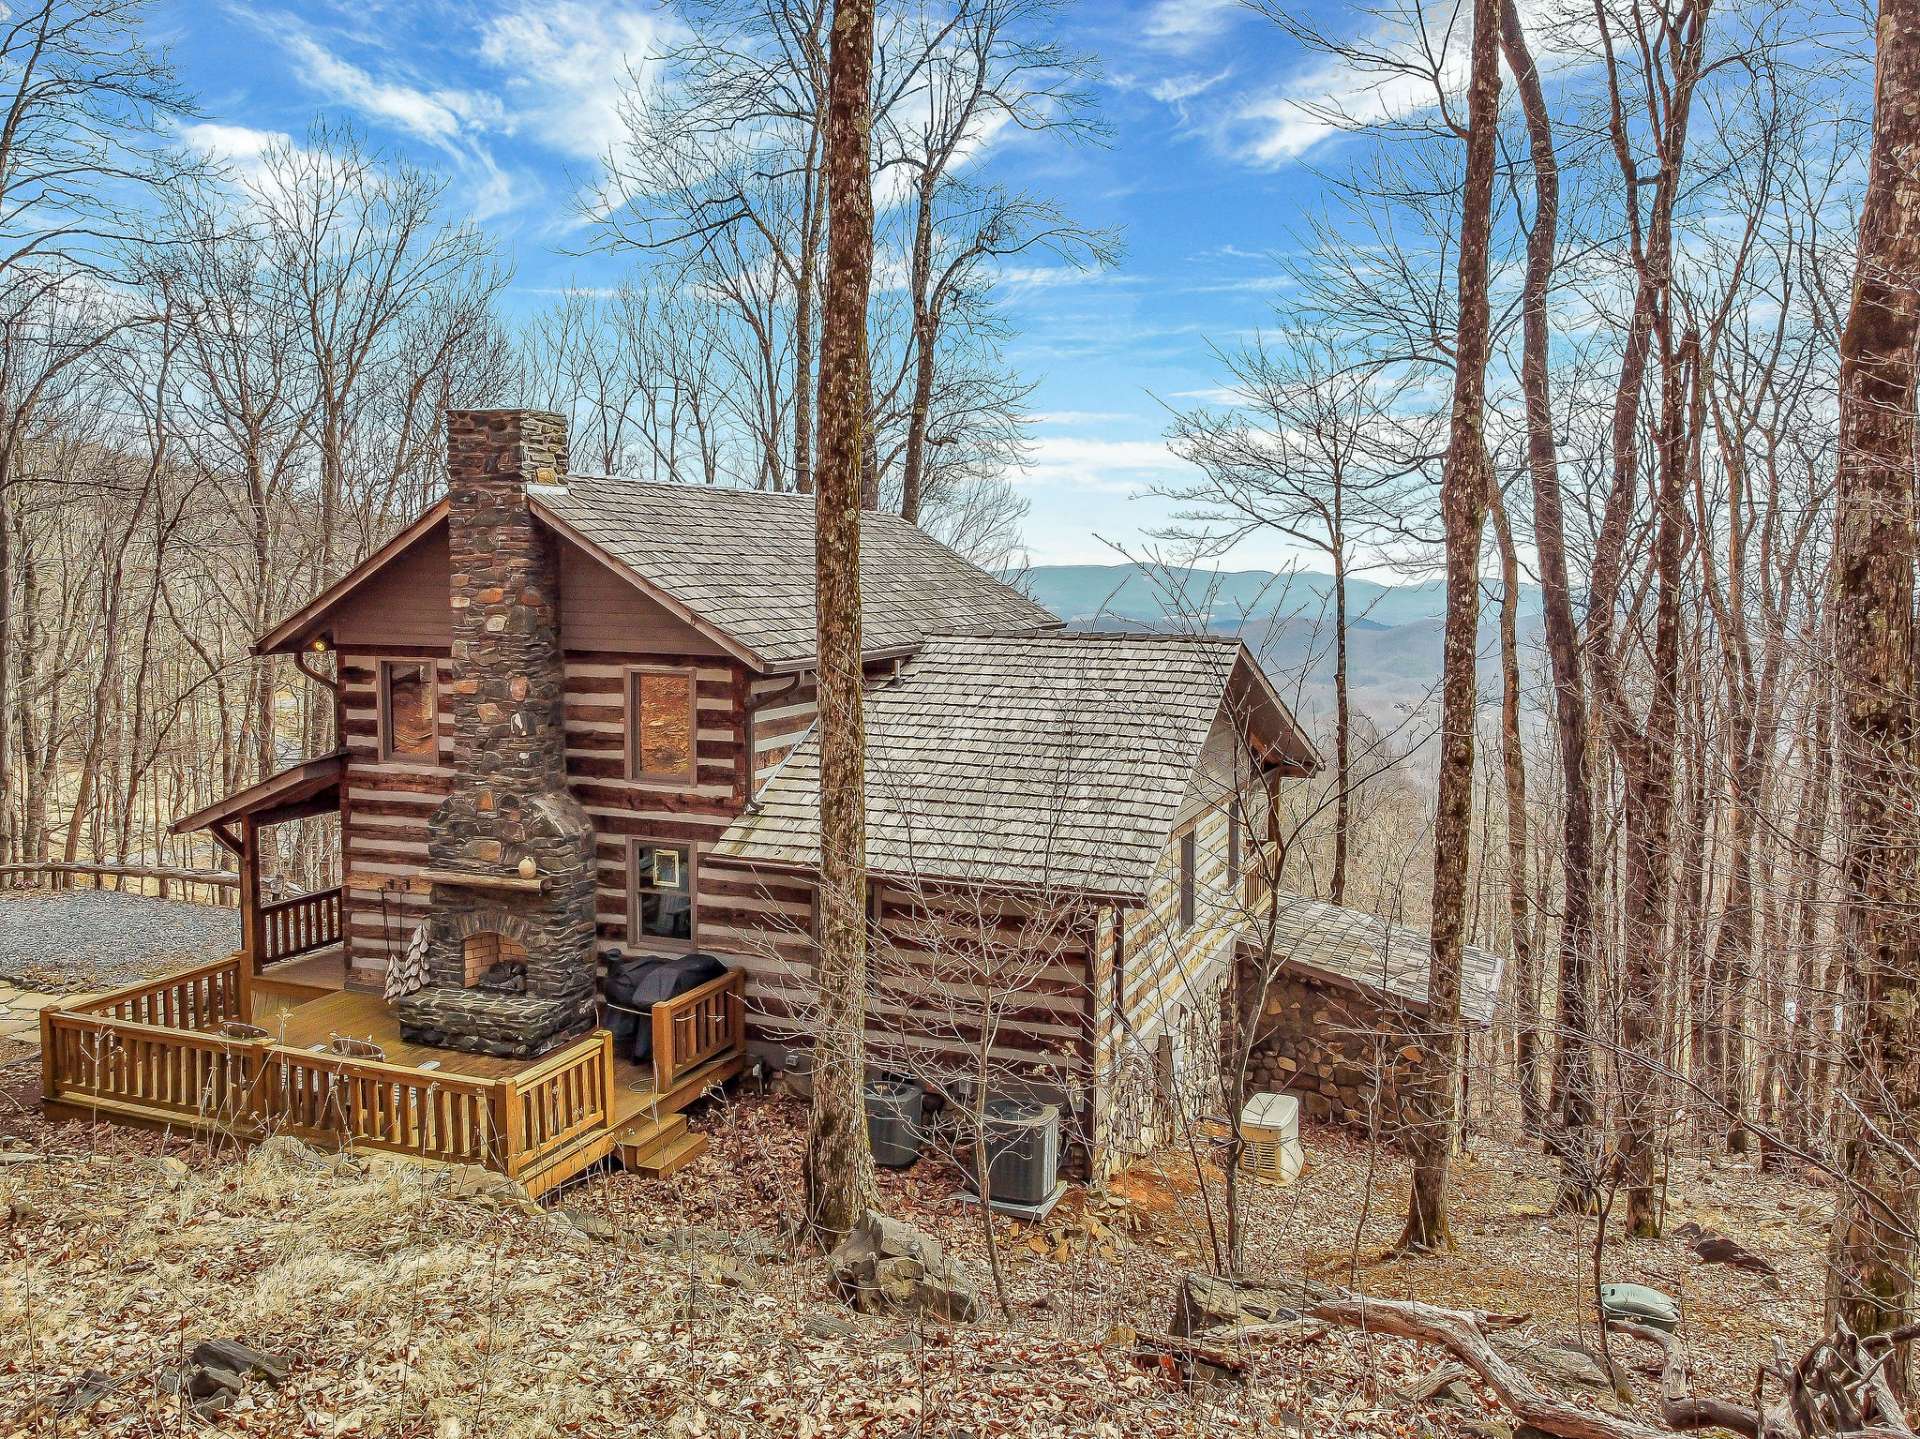 Live in luxury in your mountain retreat with over 6 acres.